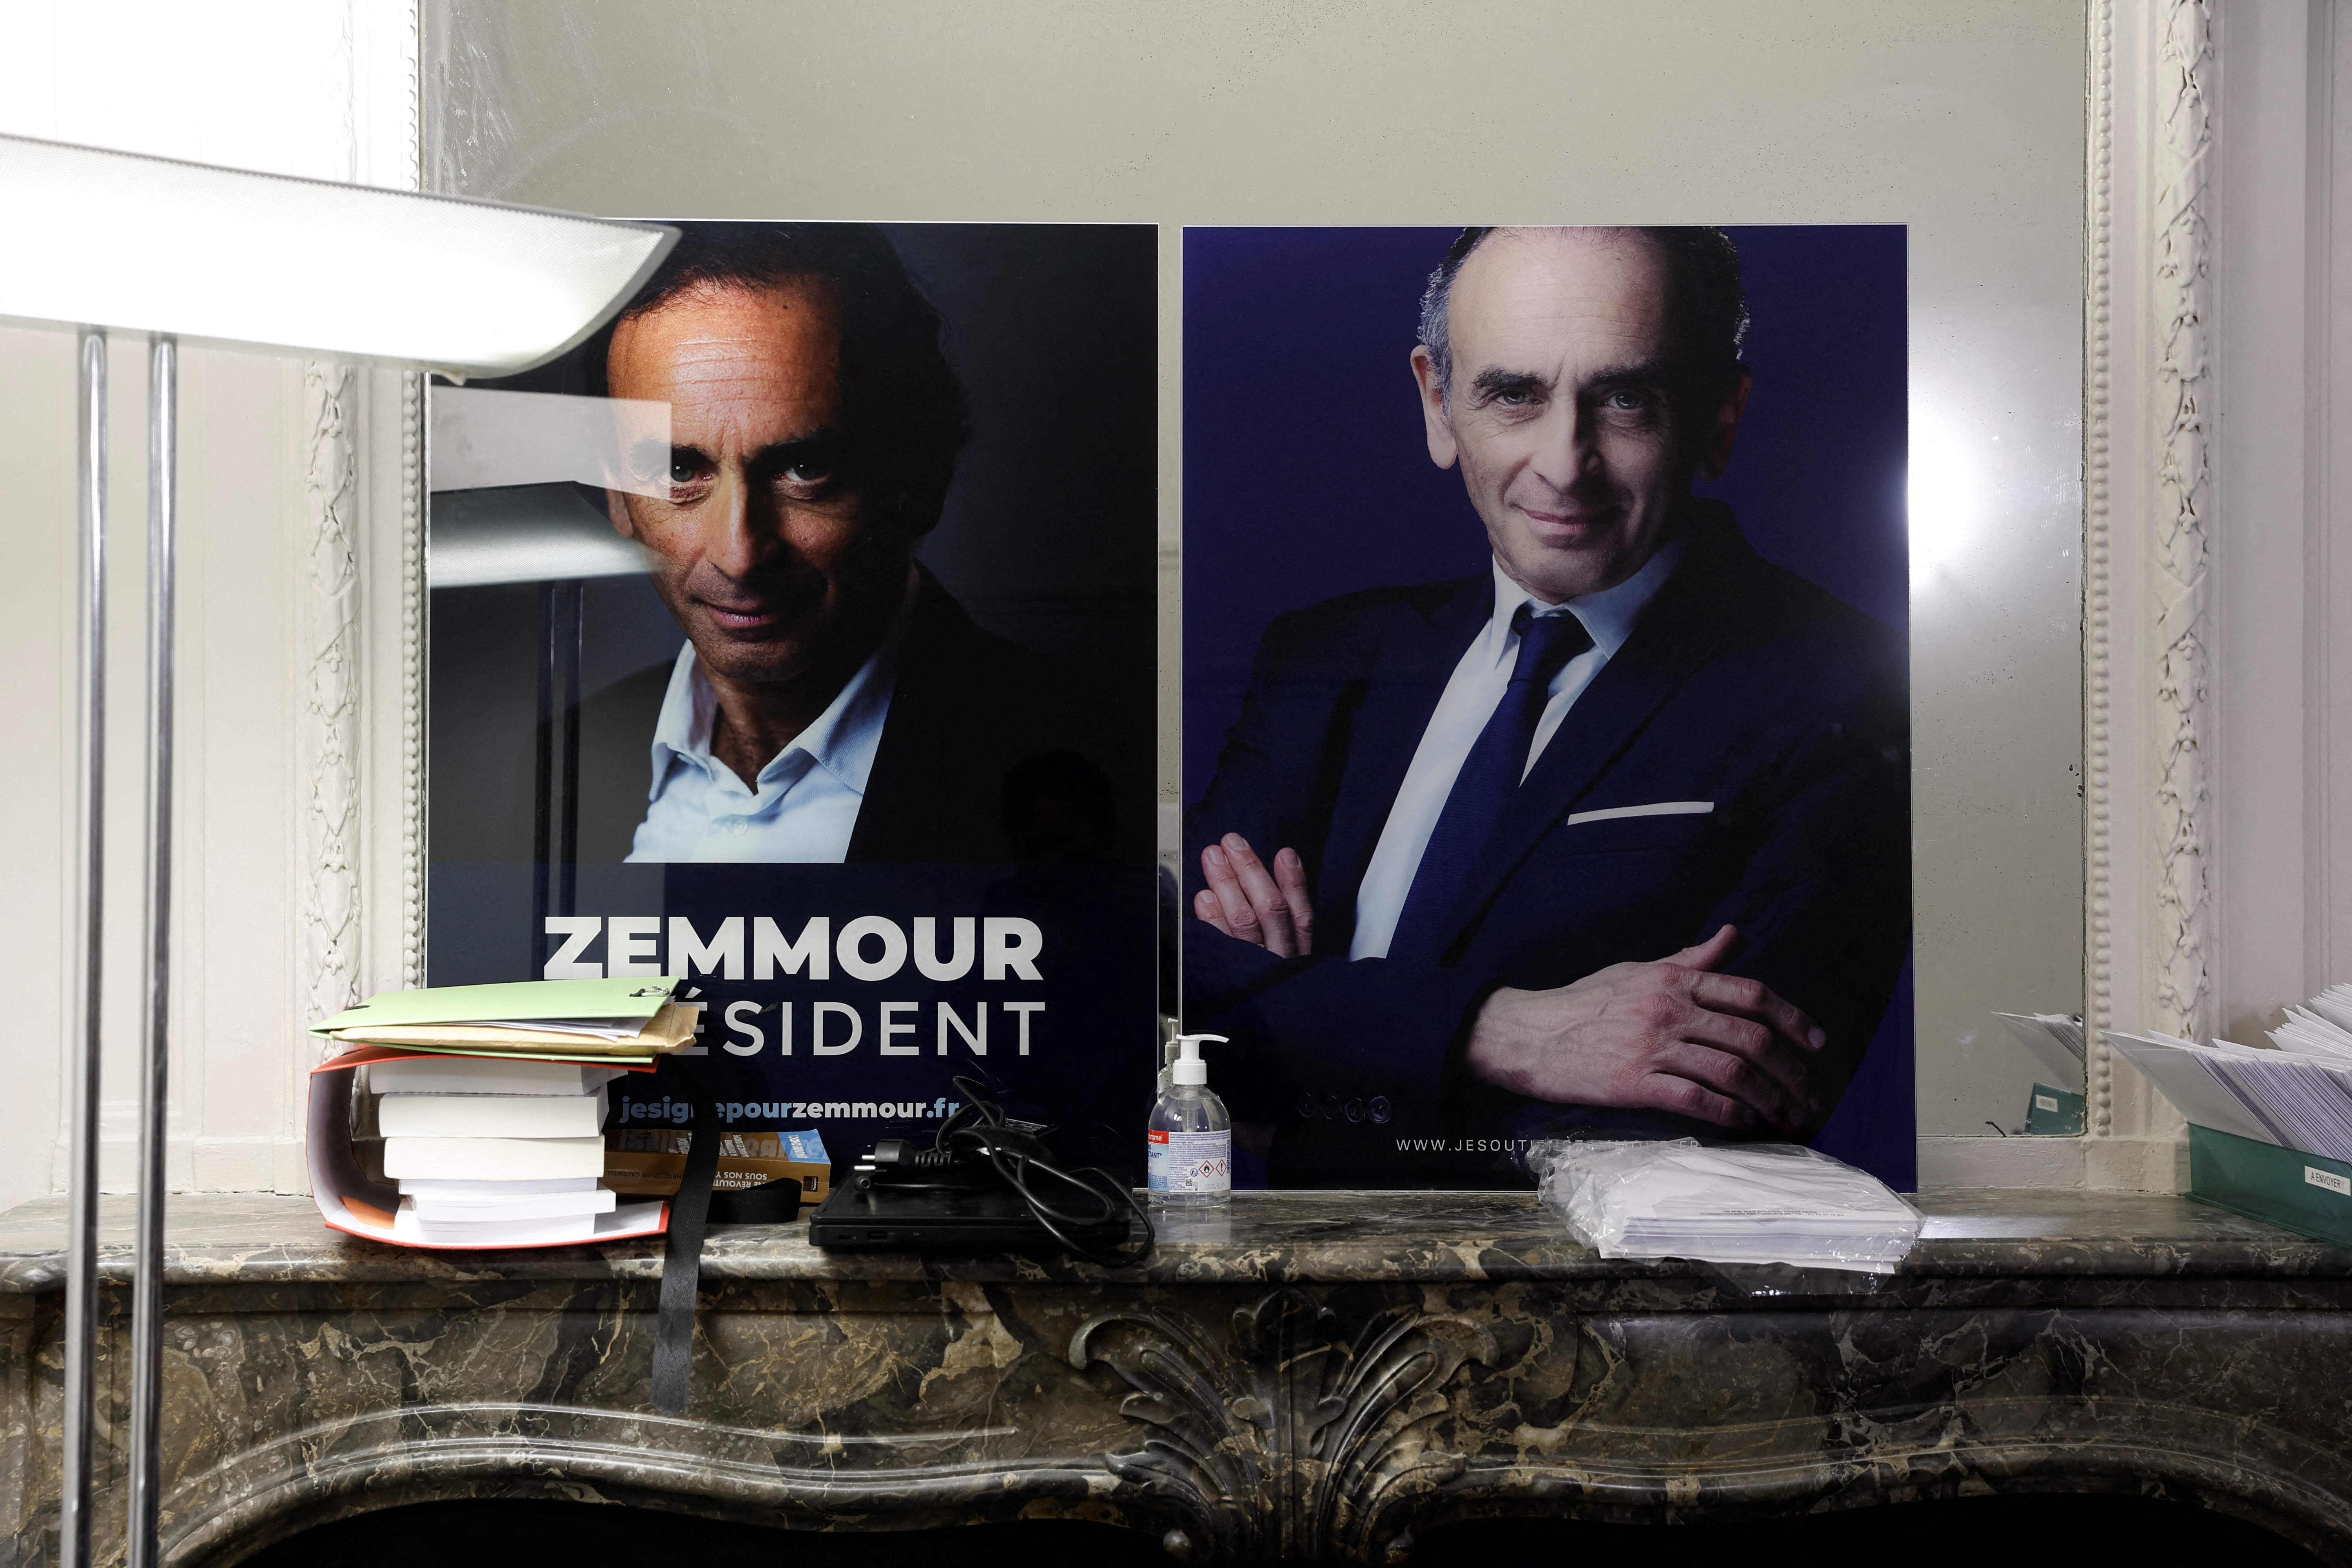 Campaign headquarters of French far-right presidential candidate Eric Zemmour in Paris